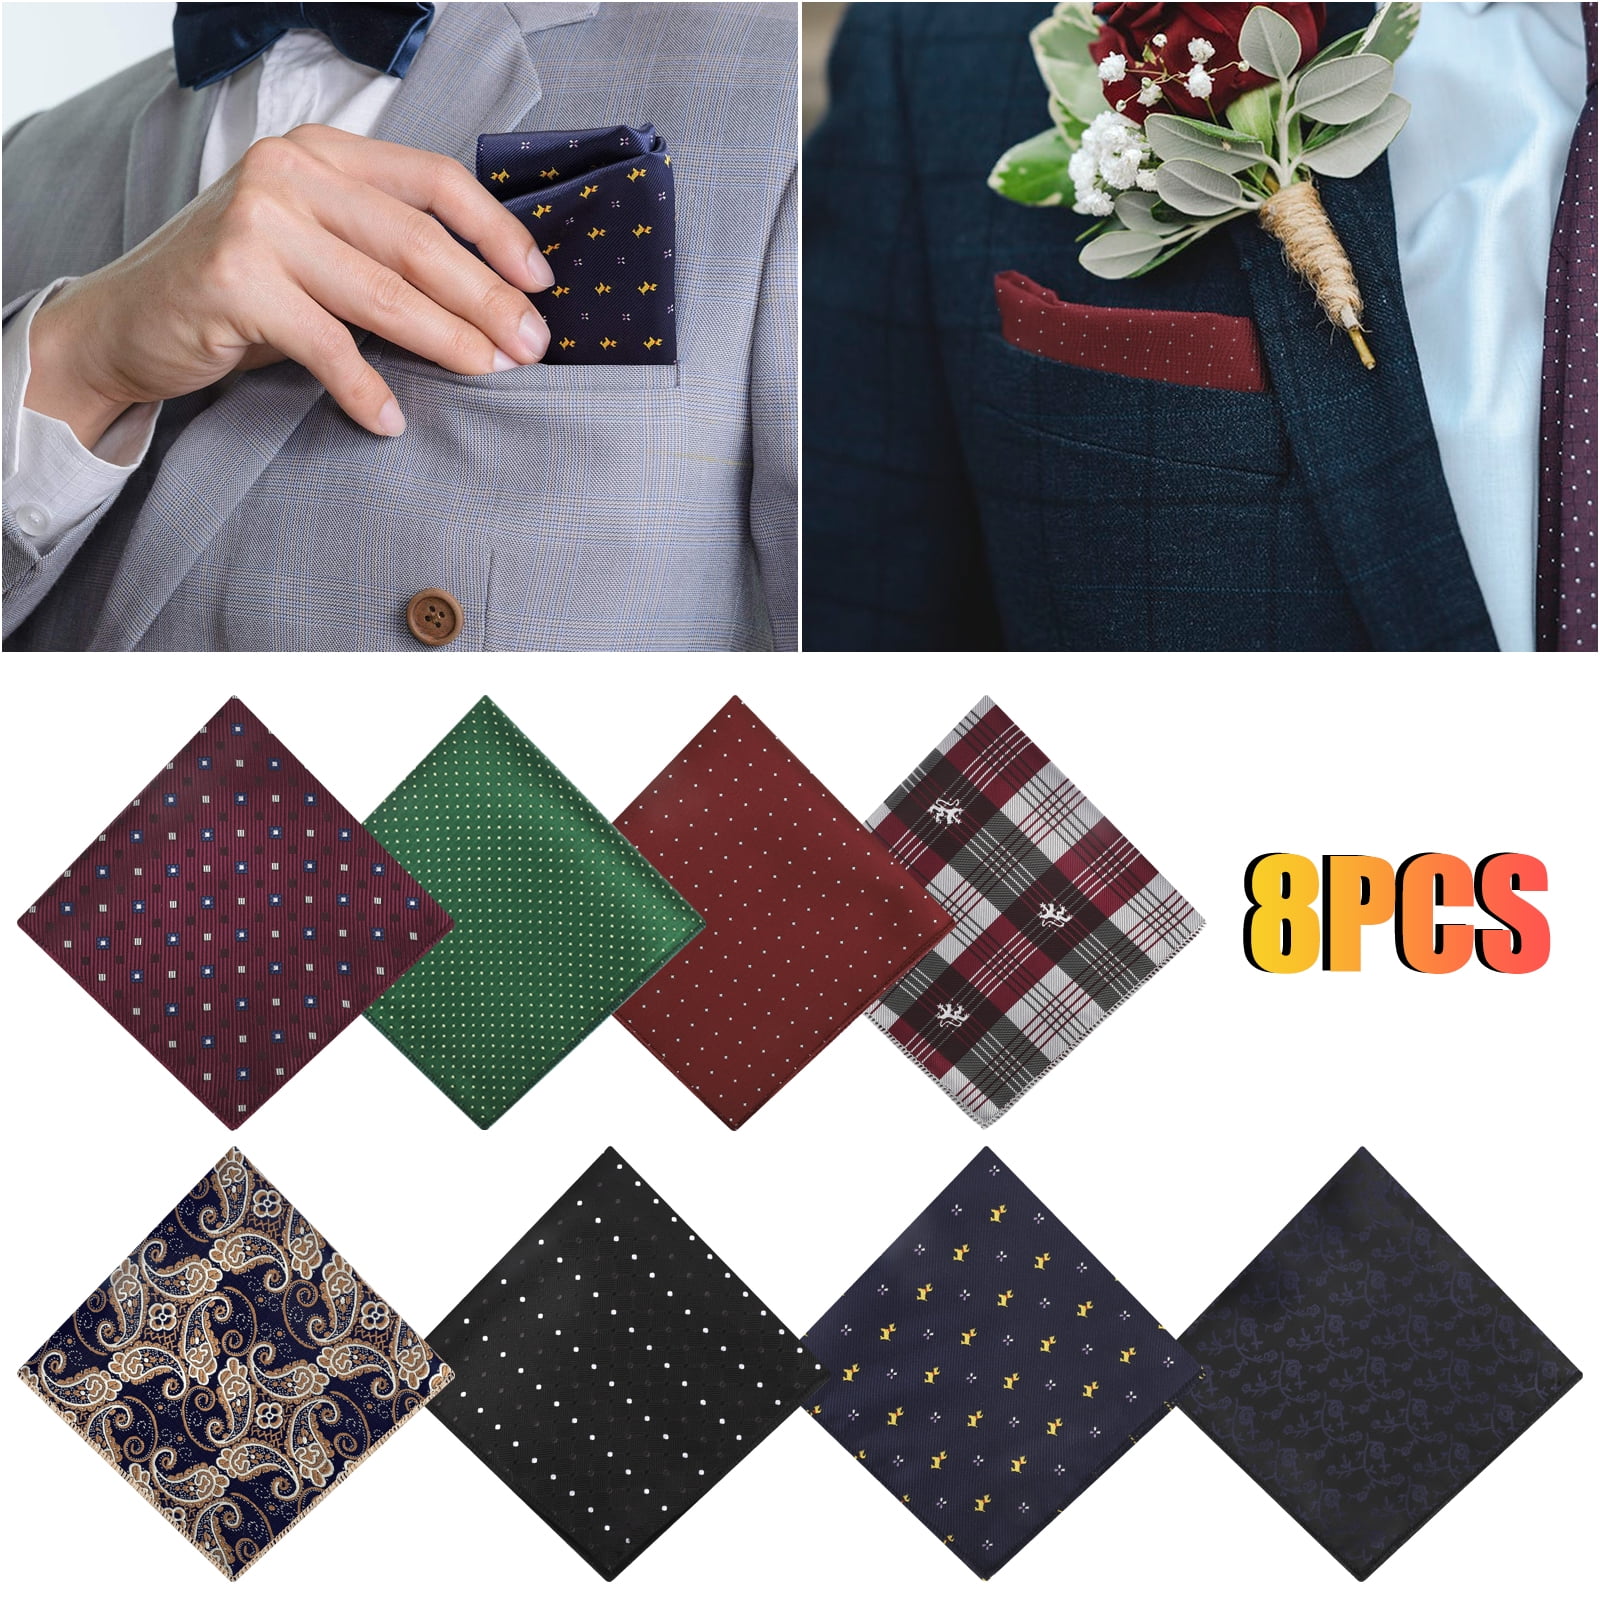 NEW MEN Plaid Checkers Hankerchief Pocket Square Hanky Wedding Formal Party Prom 